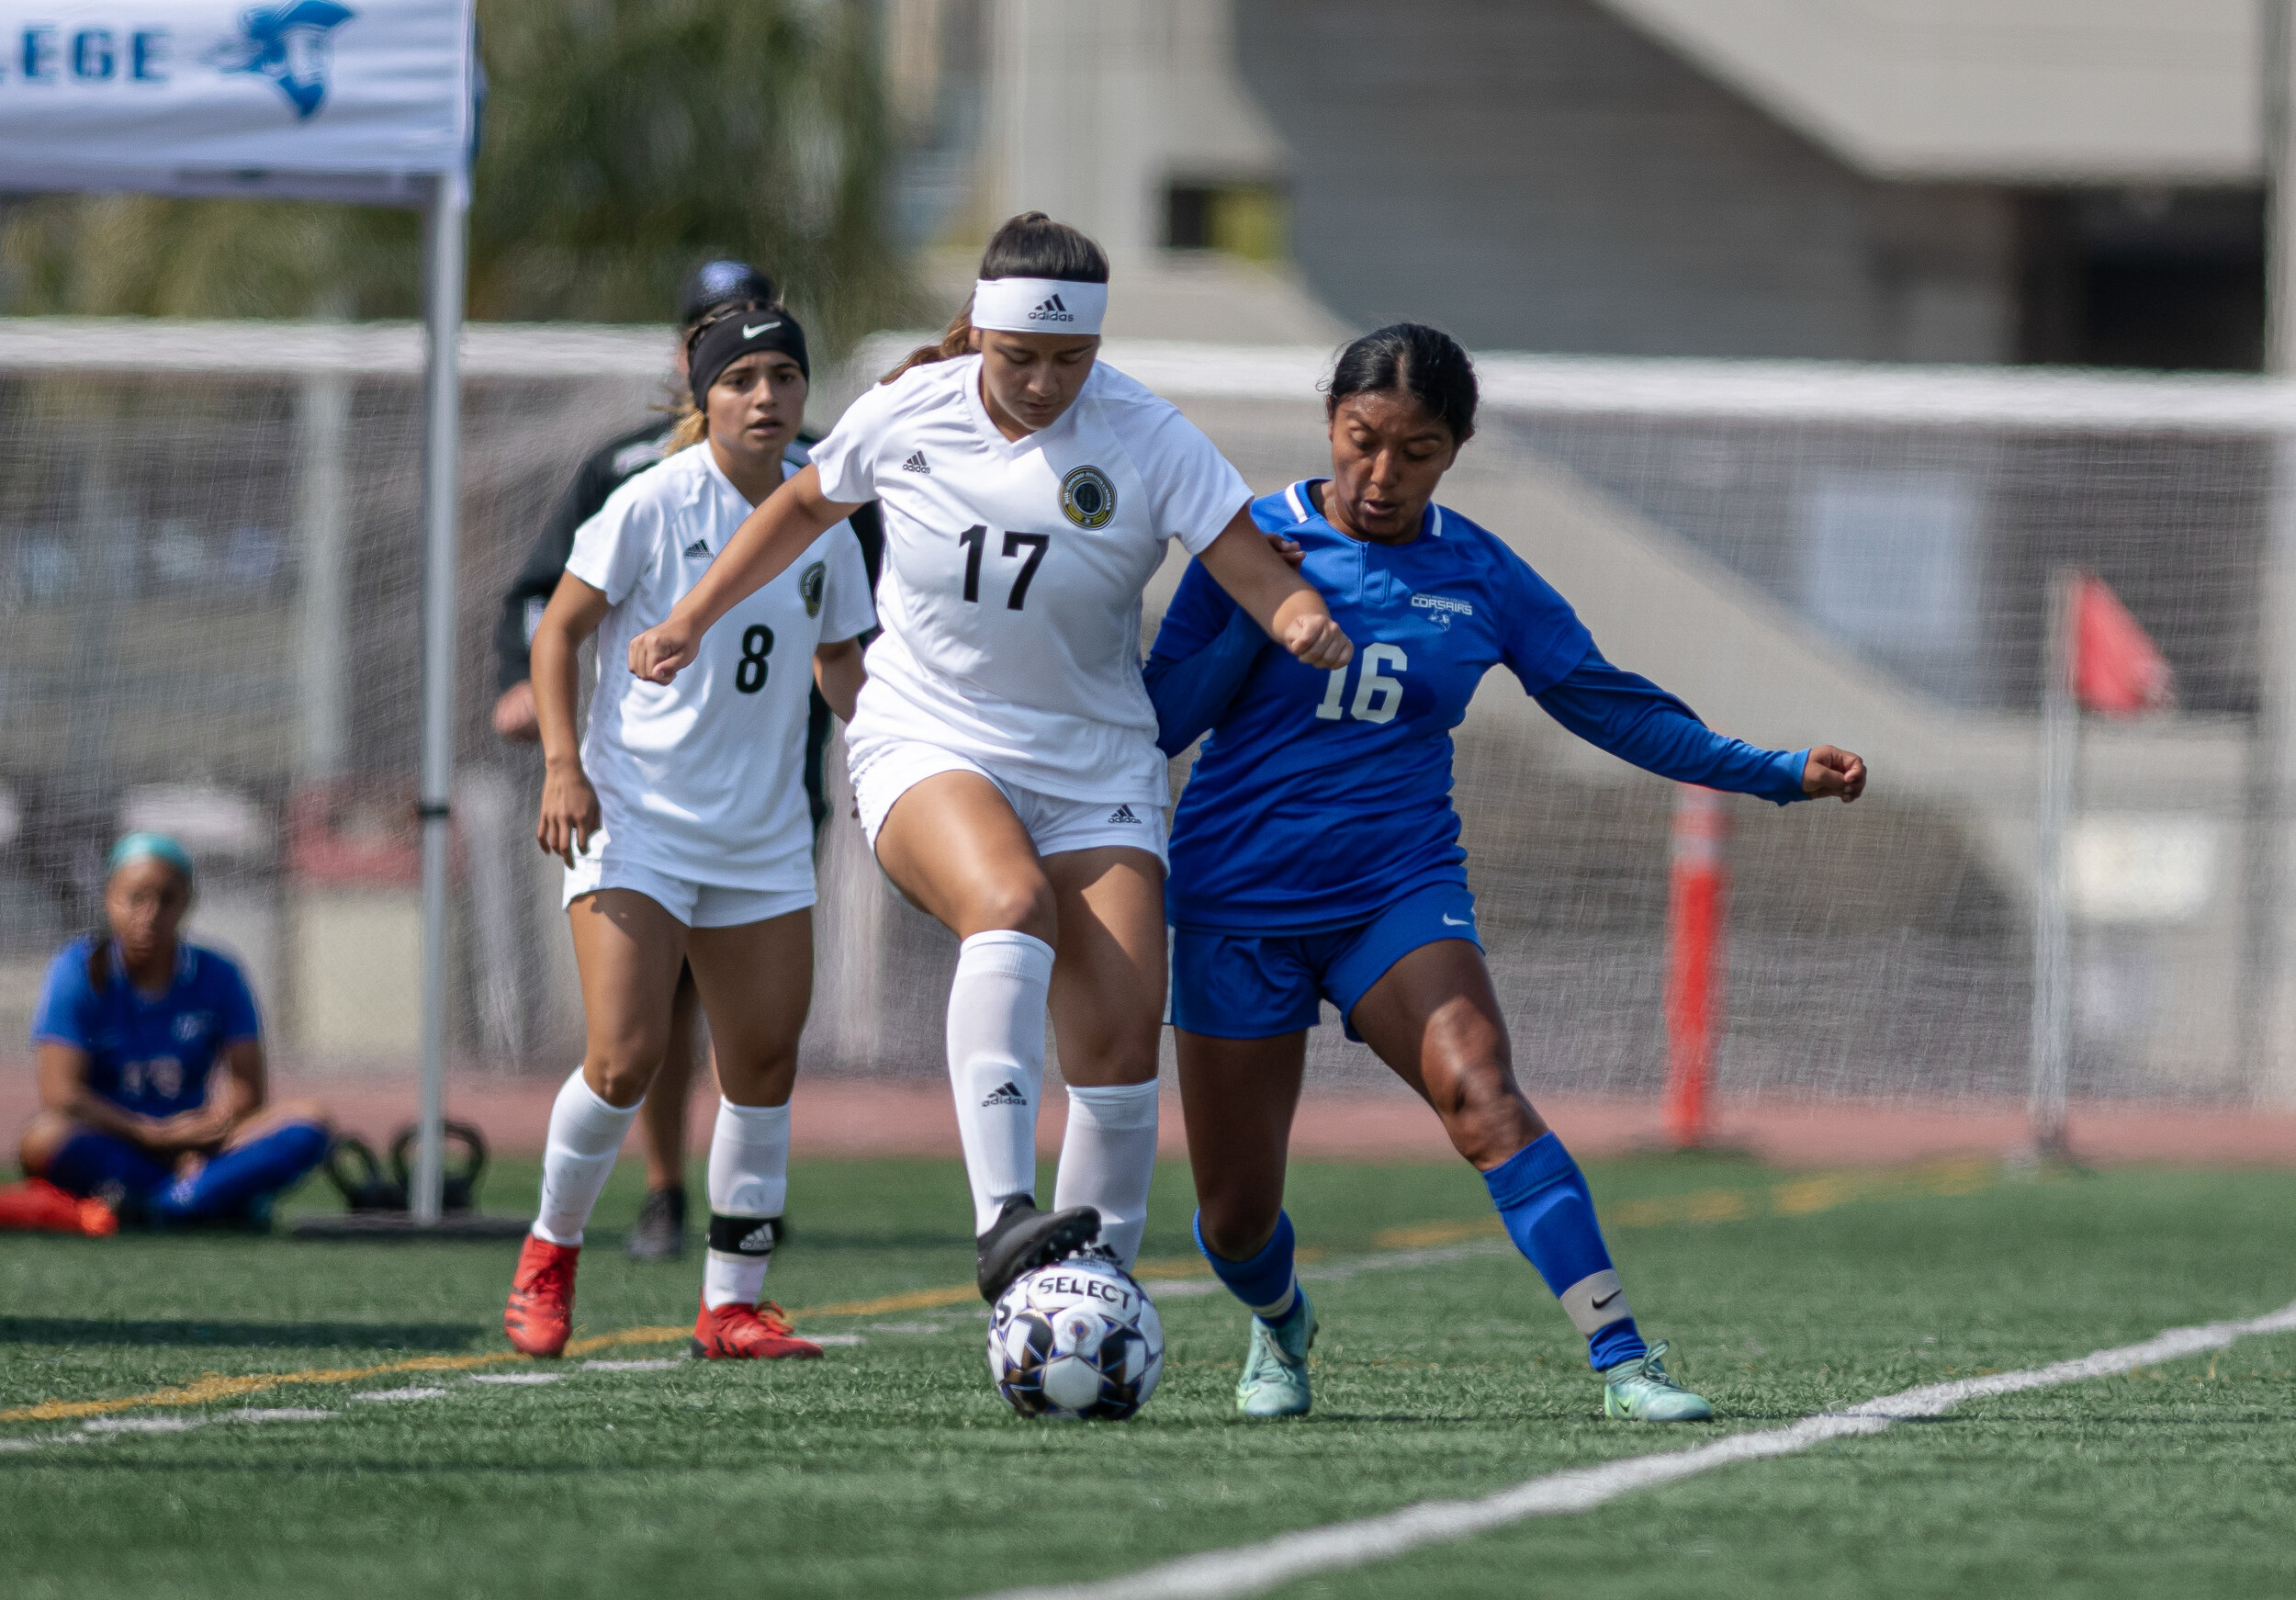  SMC freshman Diana Gaspar (16) goes head to head with a defender as she tries to take the ball from the opposing player. (Jon Putman | The Corsair) 